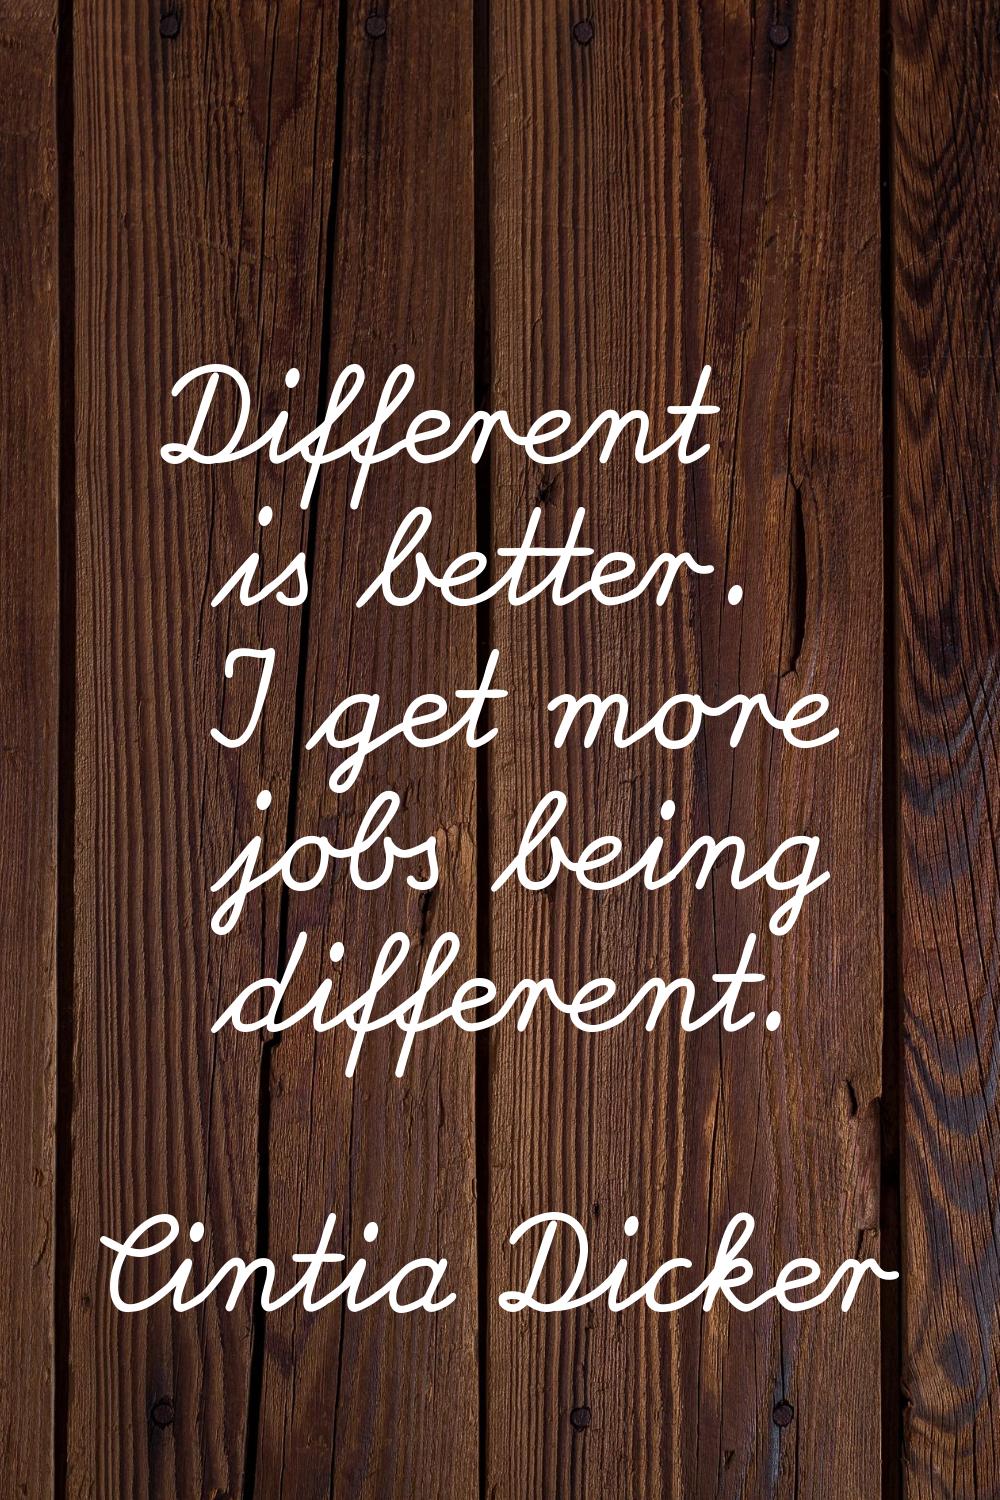 Different is better. I get more jobs being different.